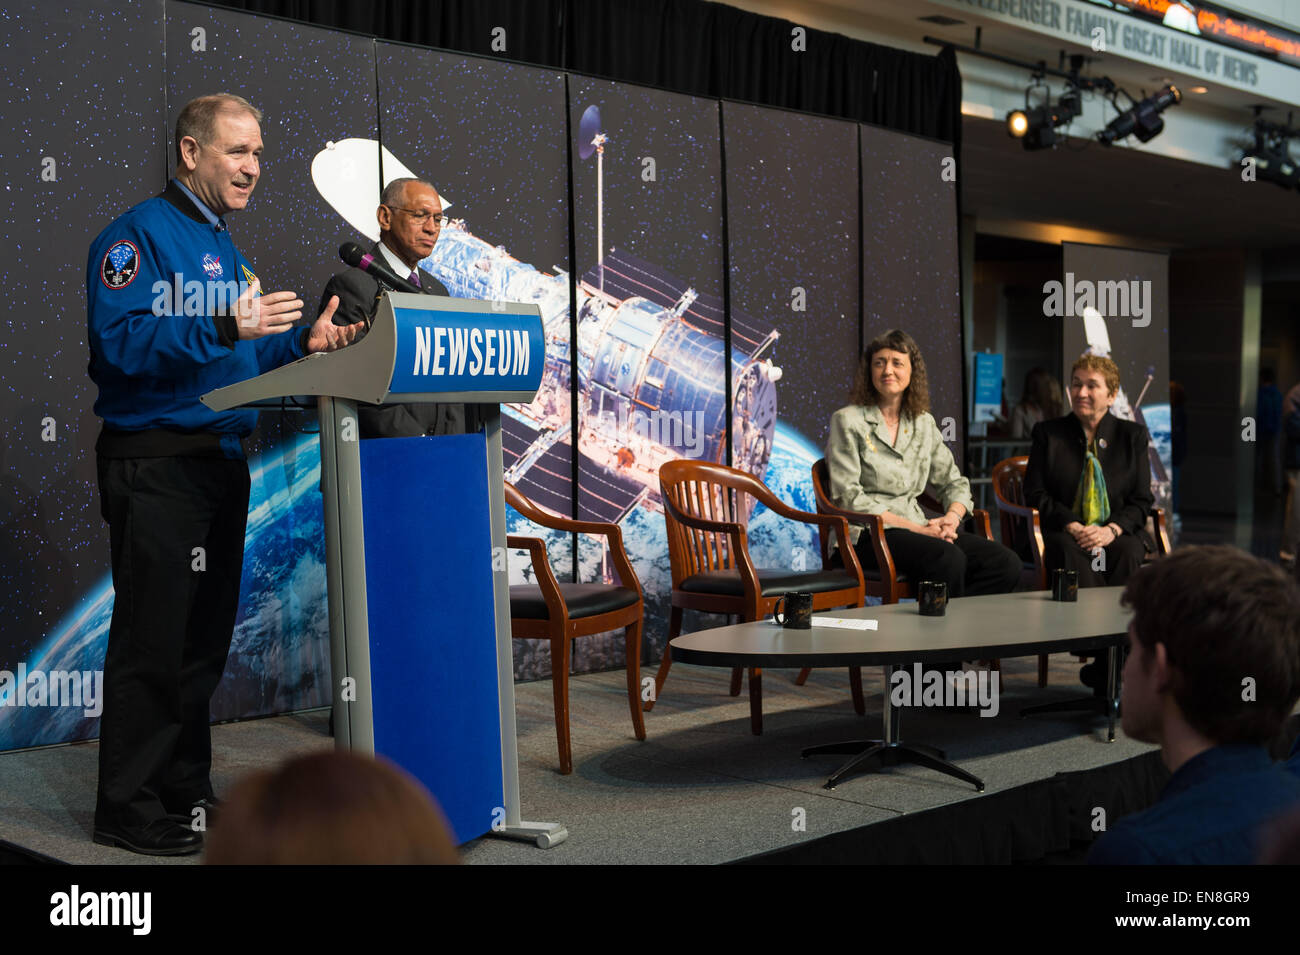 John Grunsfeld, associate administrator, Science Mission Directorate, NASA, speaks at the Hubble 25th Anniversary official image debut event on Thursday, April 23, 2015 at the Newseum in Washington, DC. The official image from Hubble's near-infrared Wide Field Camera 3 is of a two million year old cluster of about 3,000 stars called Westerlund 2, named after the astronomer who discovered it in the 1960s. Westerlund 2 is located in the constellation Carina about 20,000 light-years away from Earth. Stock Photo